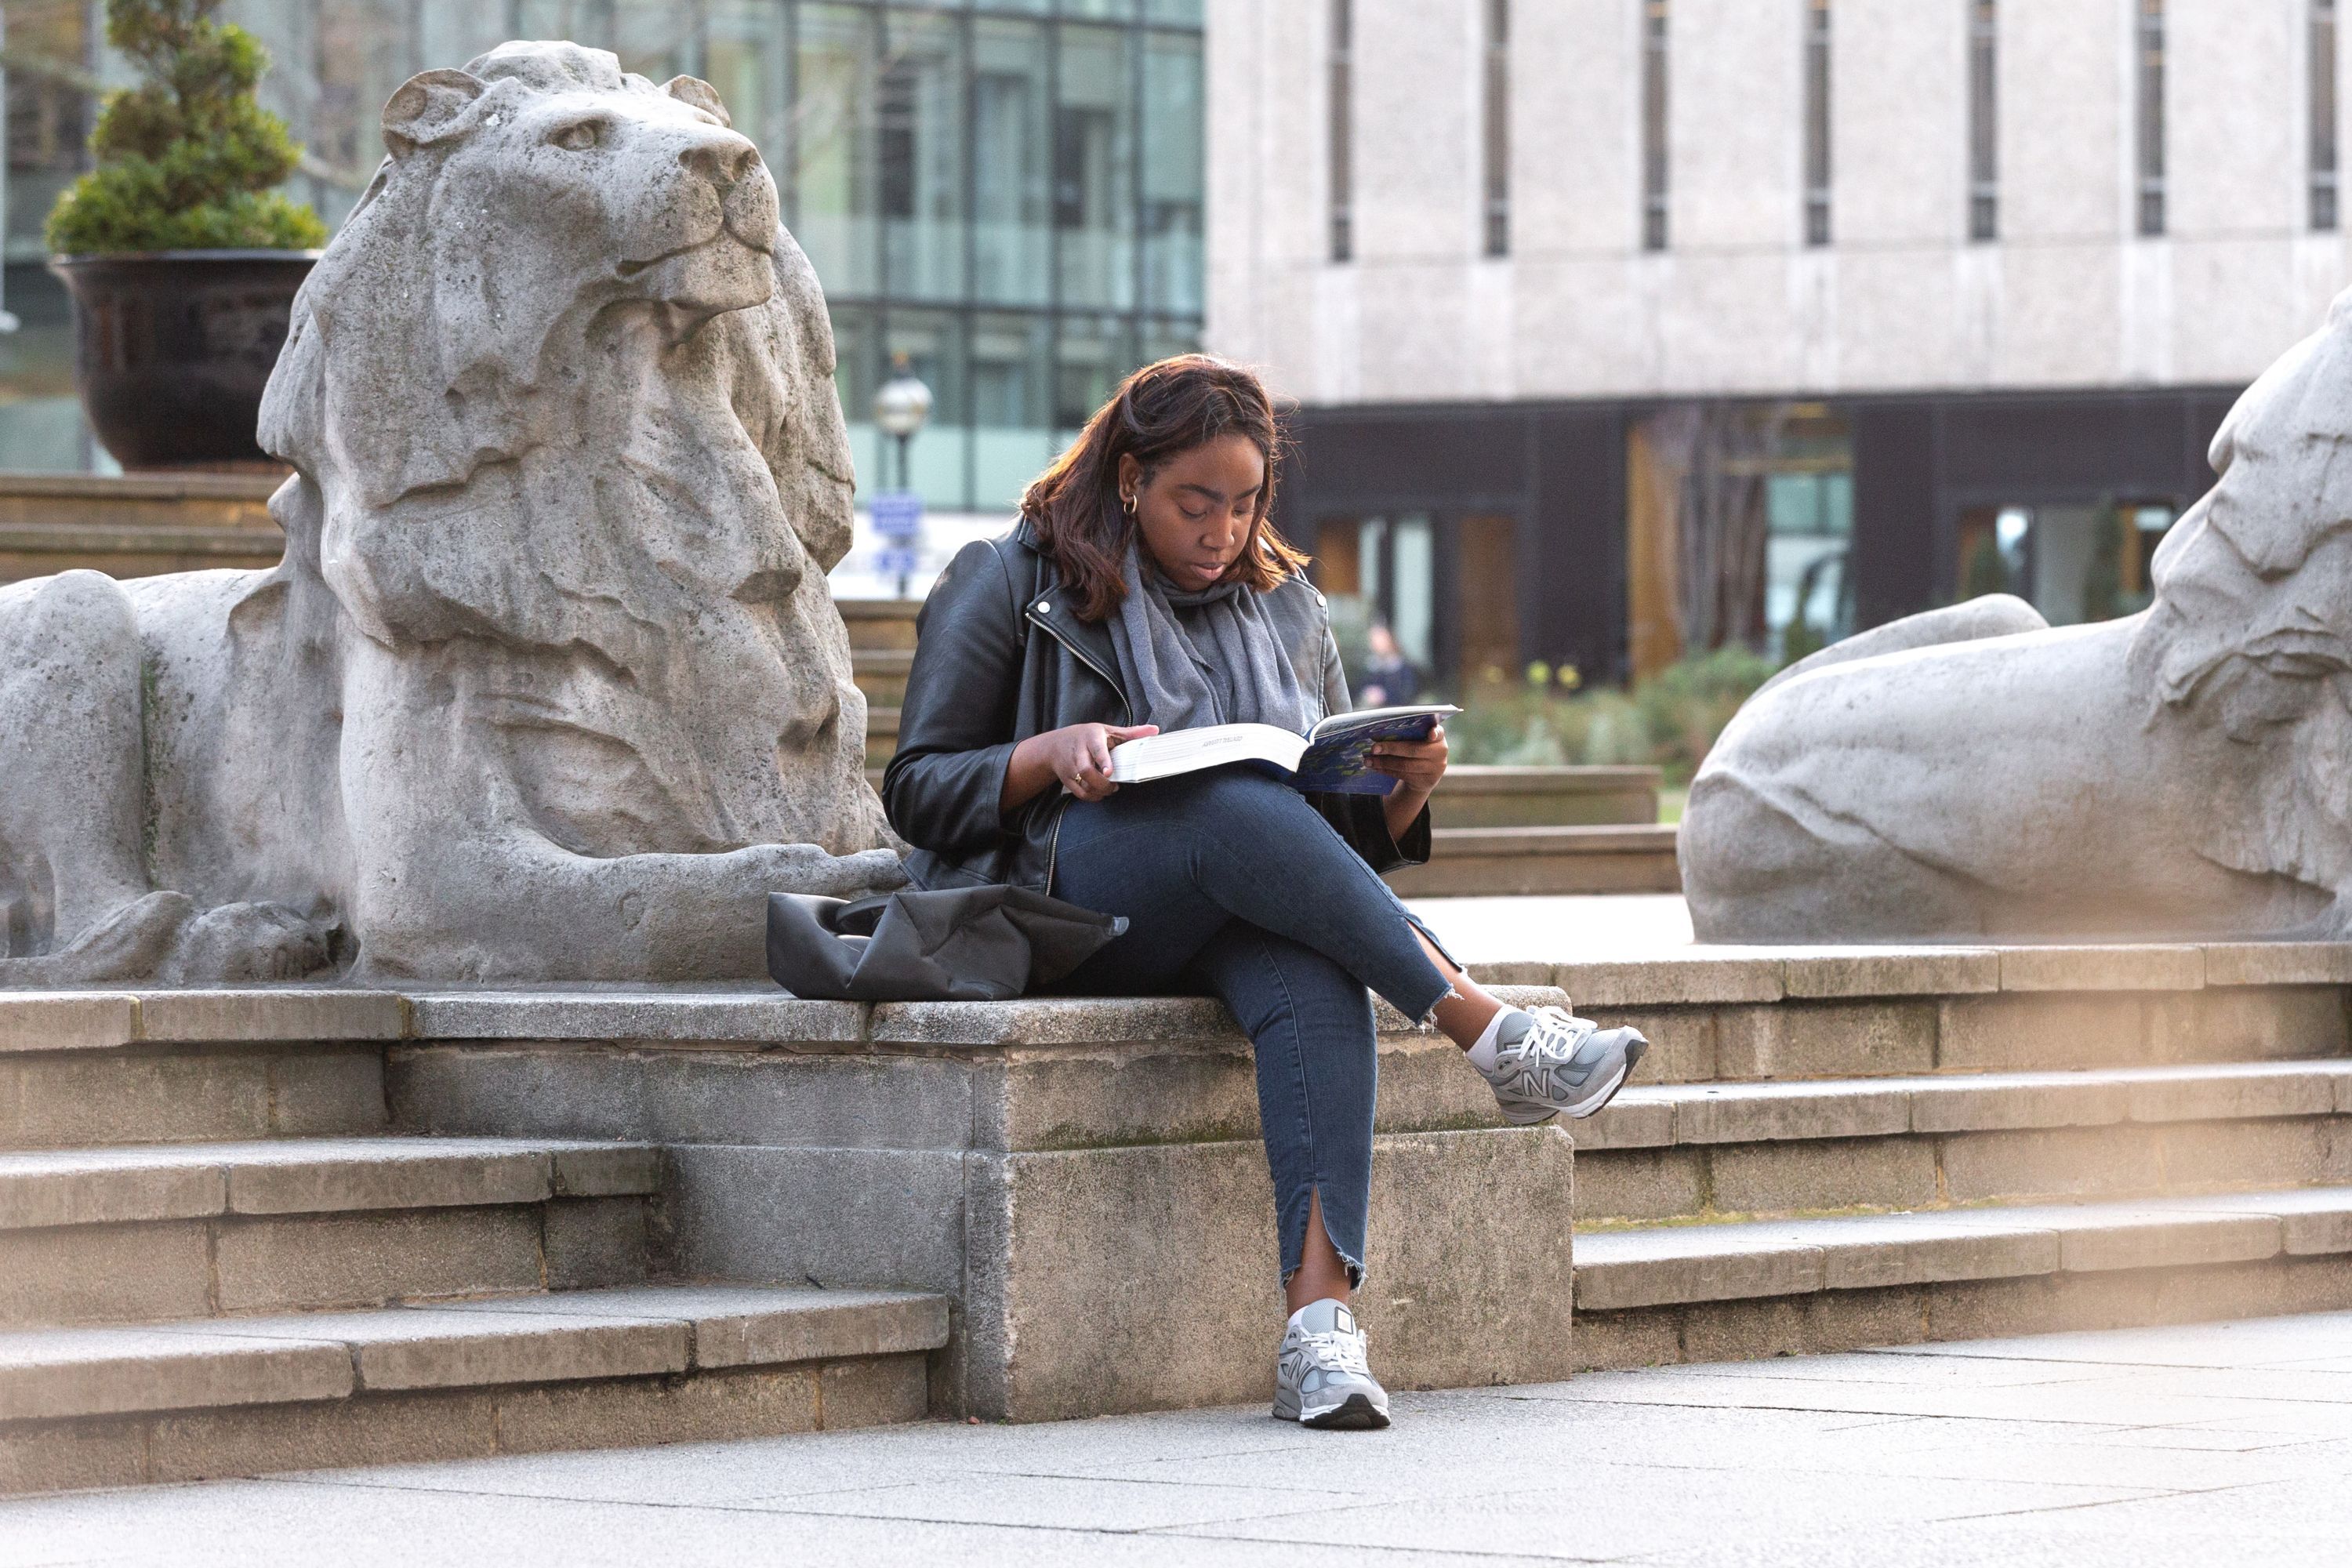 A student sat next to the Imperial lions reading